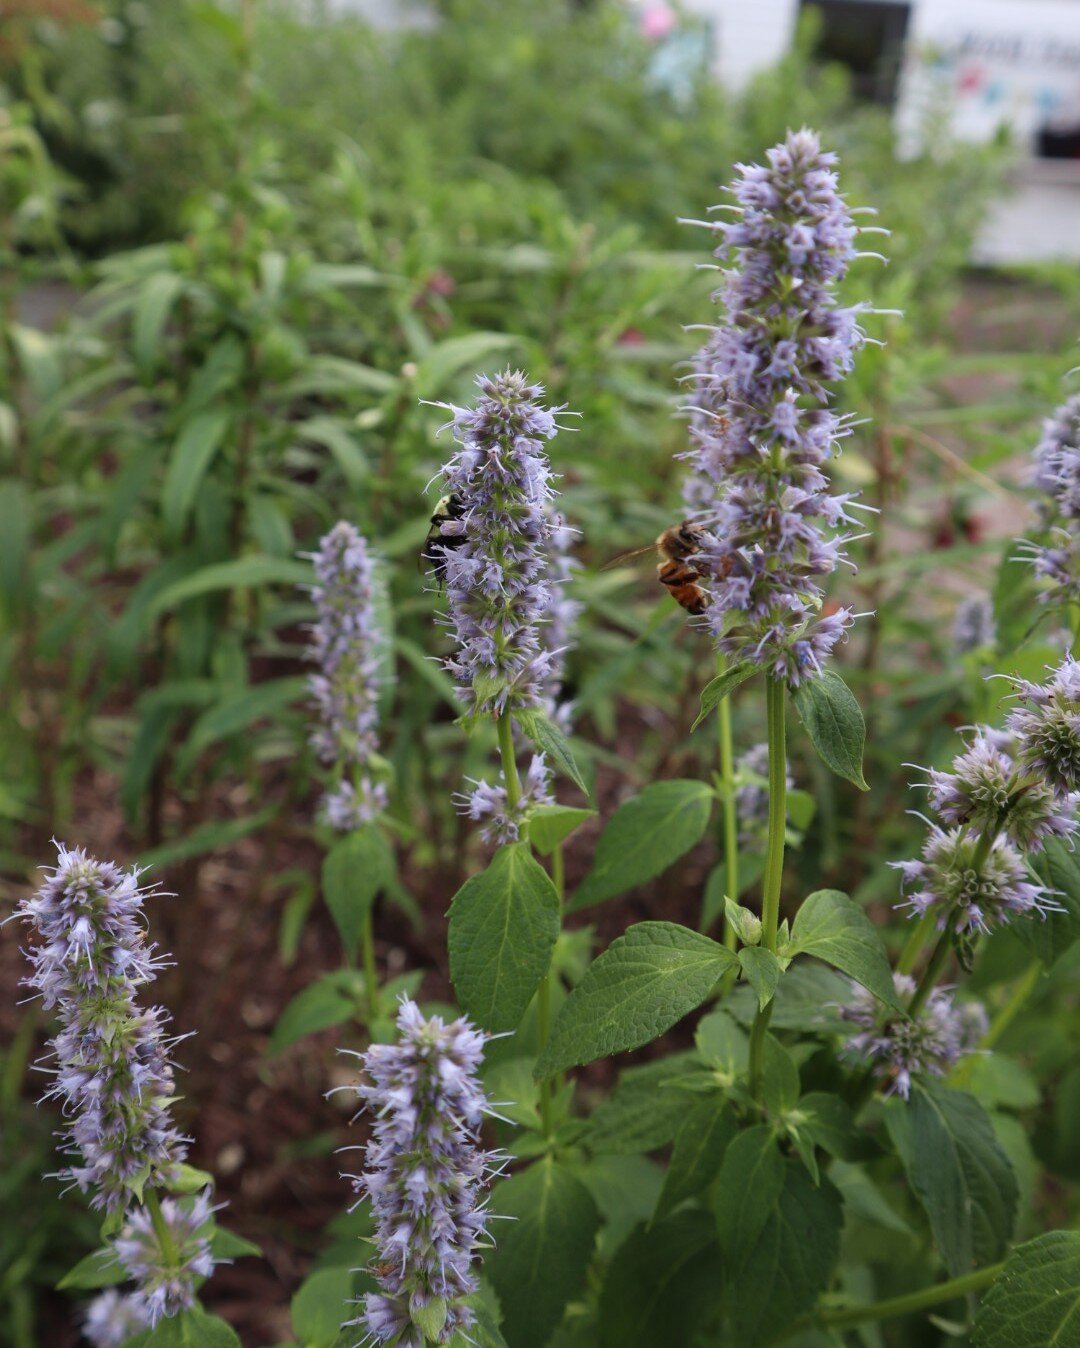 We know you all are busy 🐝🐝🐝 but don't forget to stop by the pollinator garden to admire native perennials in bloom.